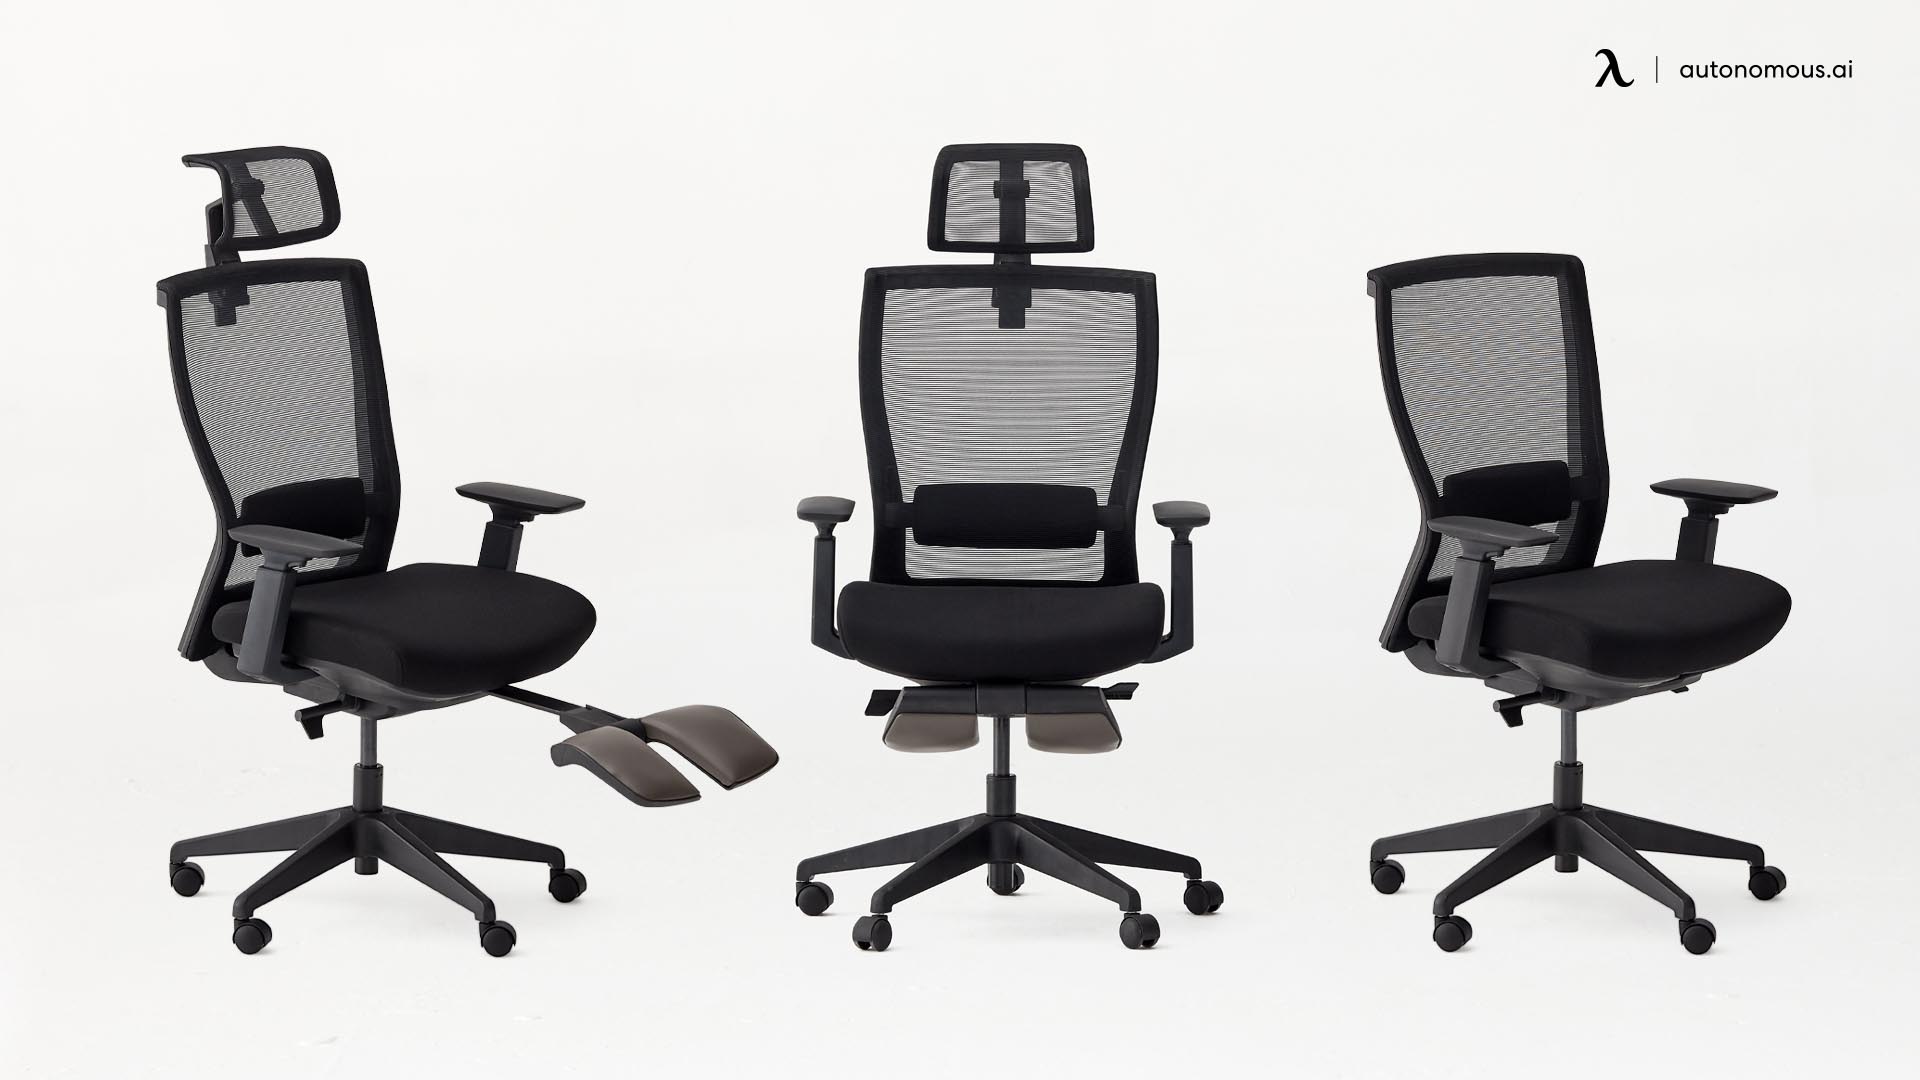 The 20 Best Ergonomic Chairs In India, Best Ergonomic Office Chair India 2021